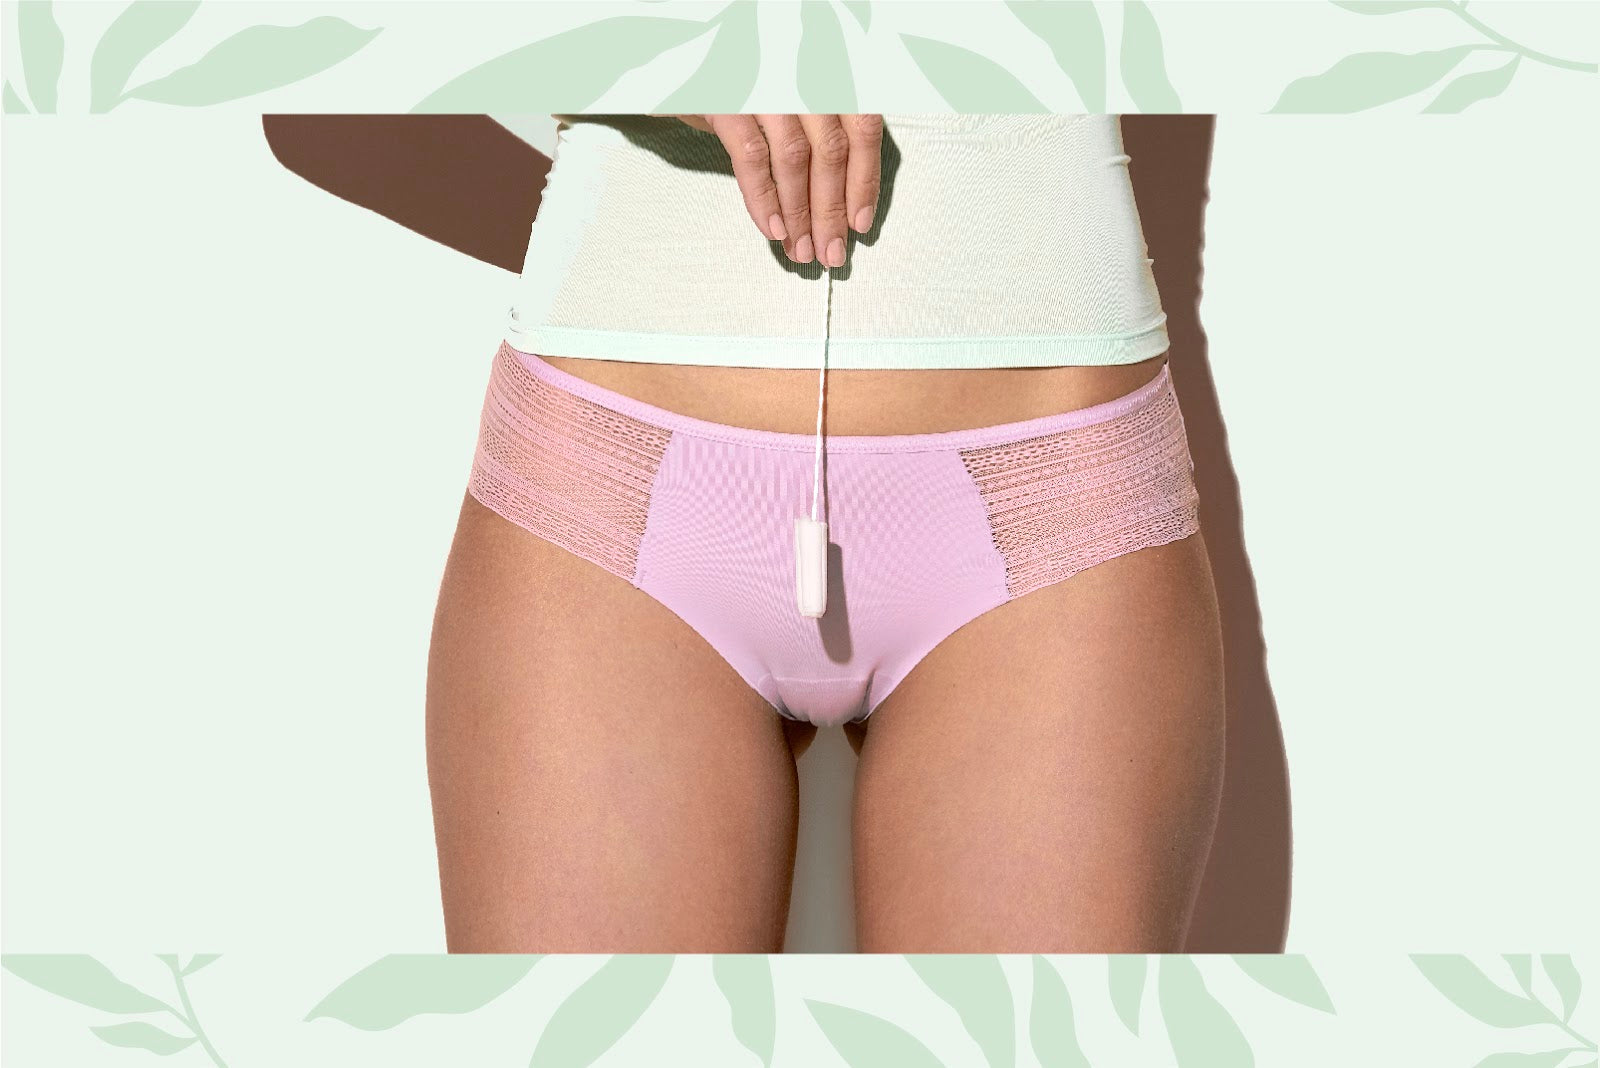 Understanding Panty Liners - Misconceptions, Do's and Don'ts